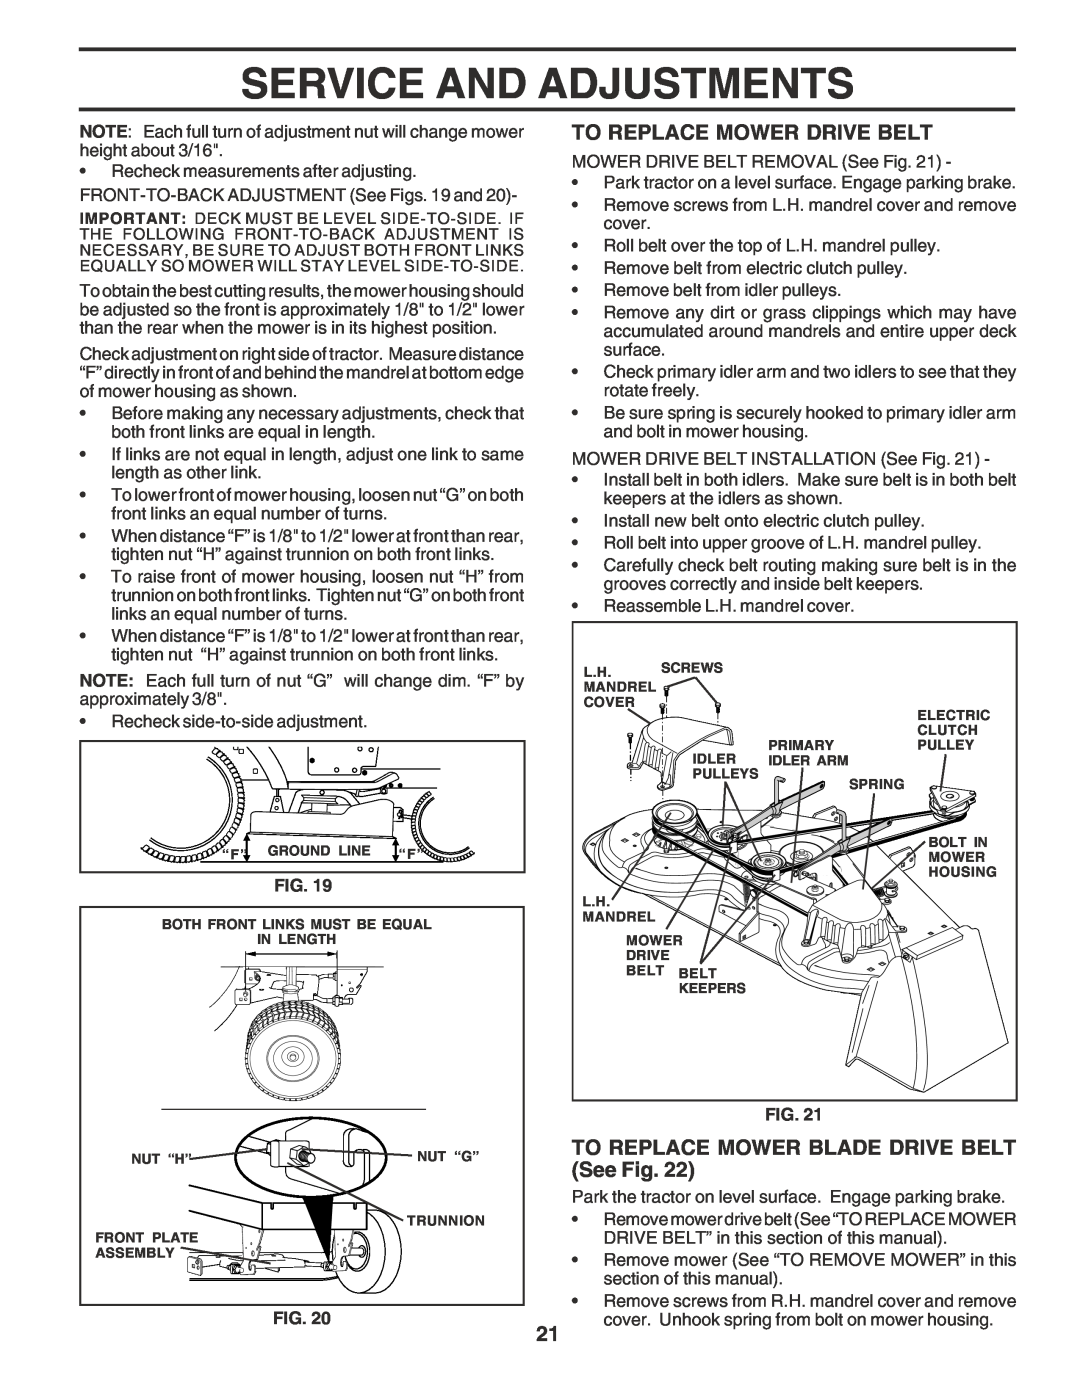 Husqvarna GTH2350 Service And Adjustments, To Replace Mower Drive Belt, TO REPLACE MOWER BLADE DRIVE BELT See Fig 